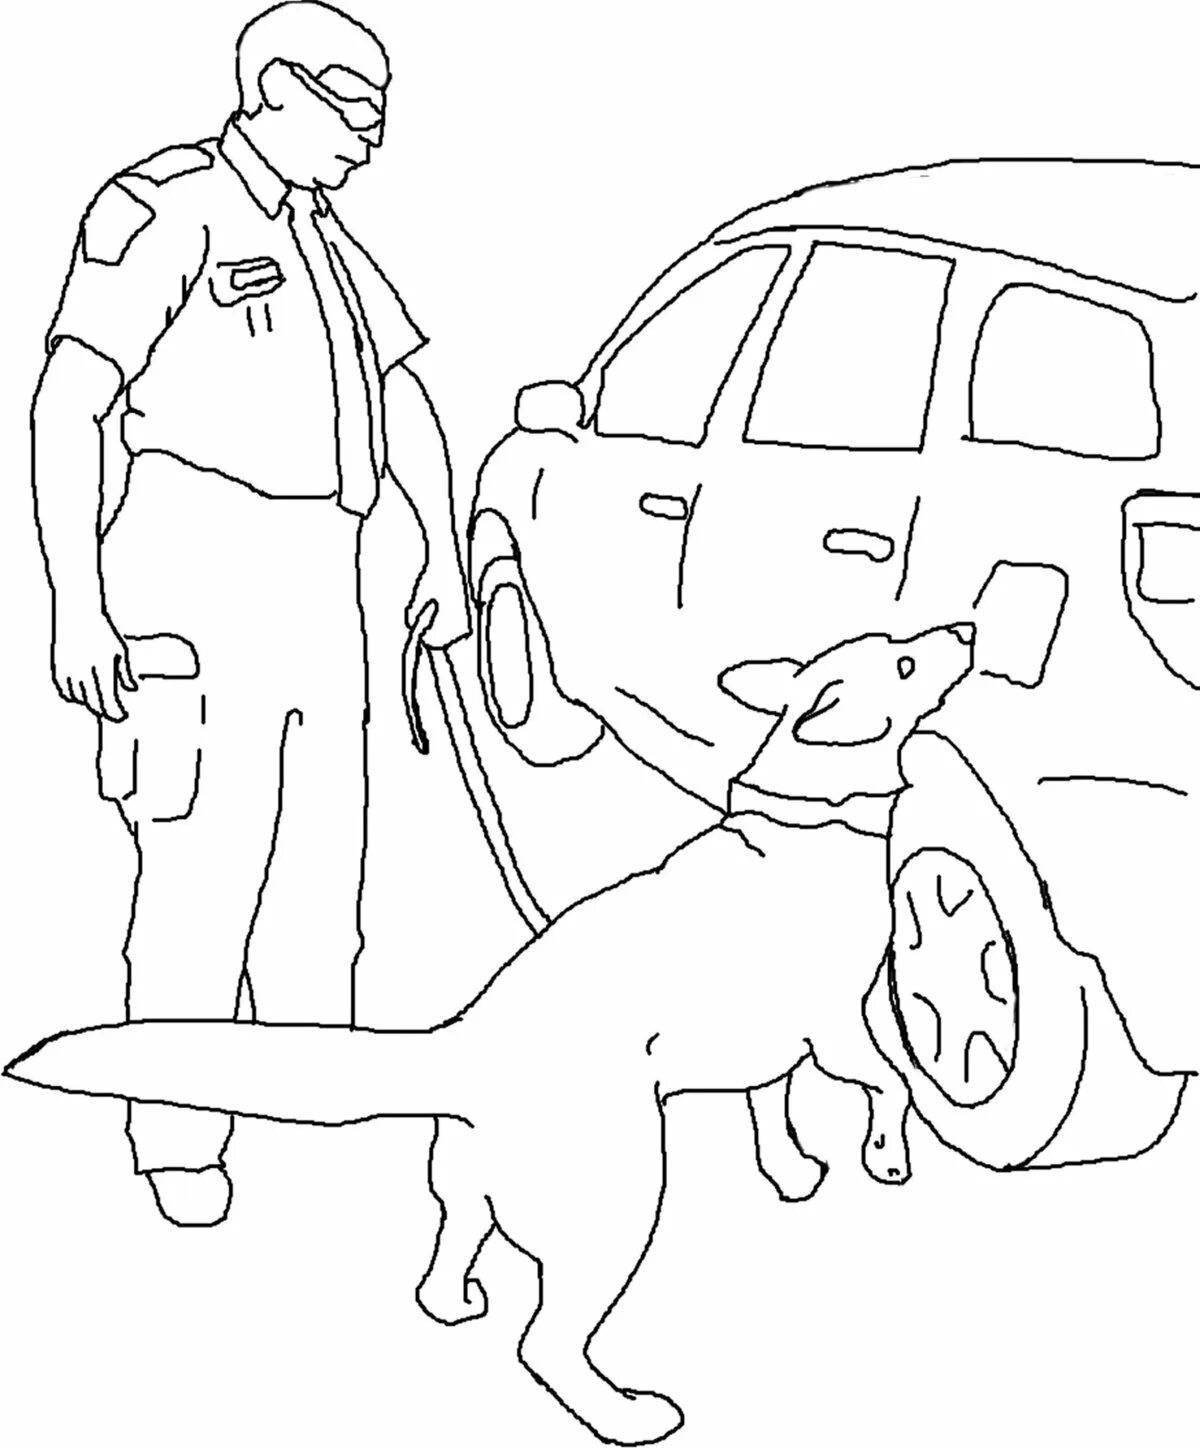 Majestic police dog coloring page